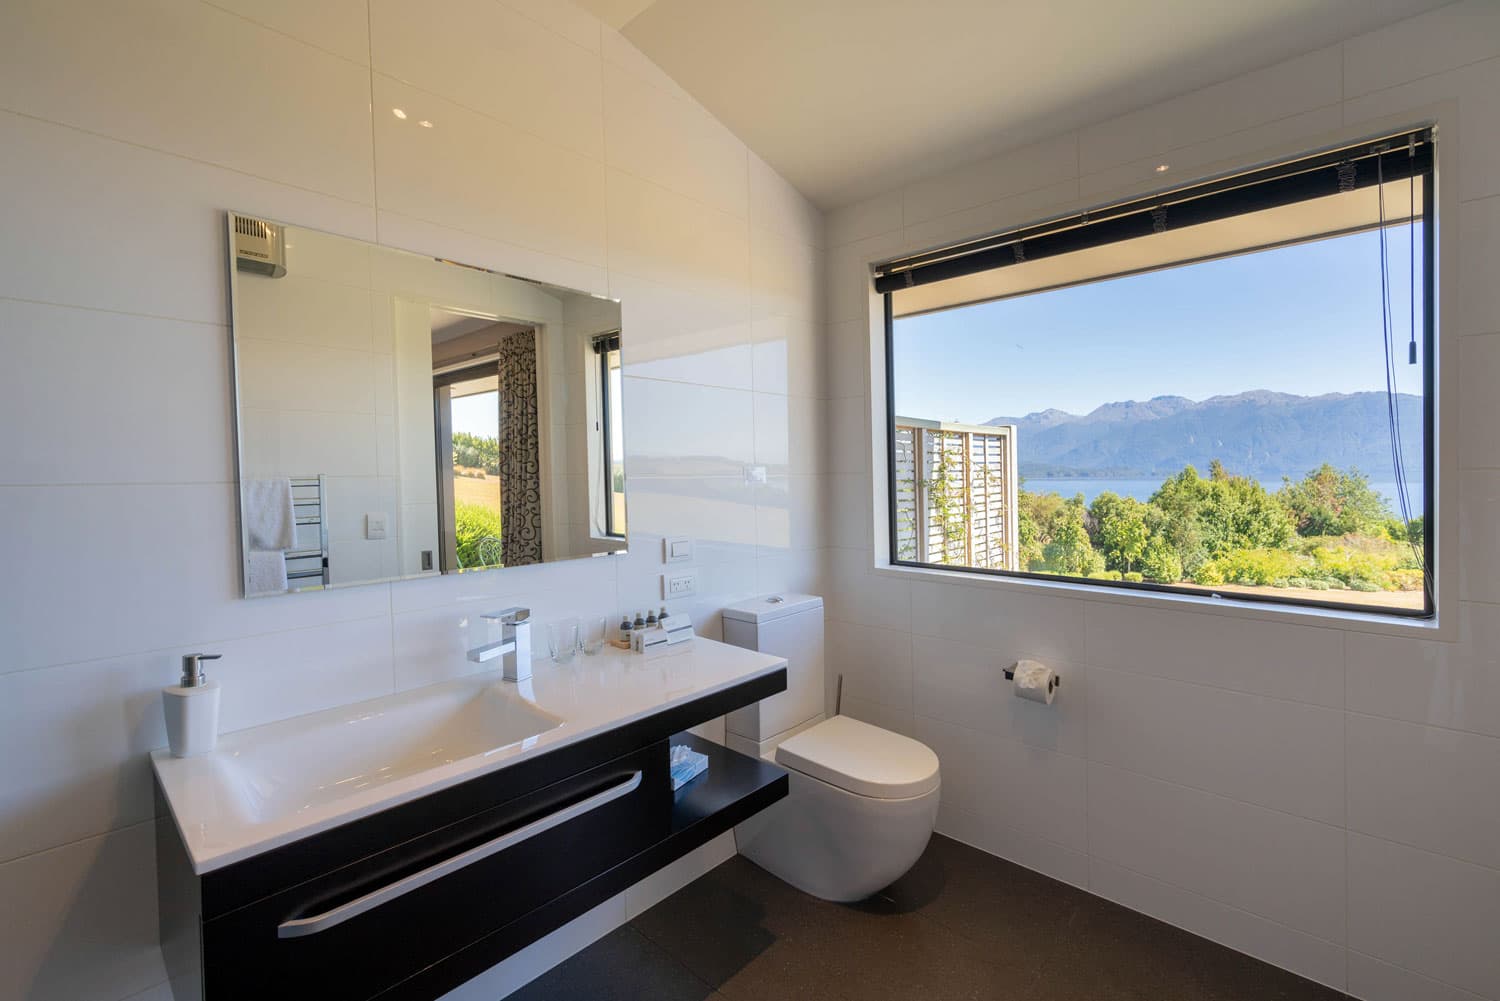 The South Arm Room private ensuite bathroom also features lake views.